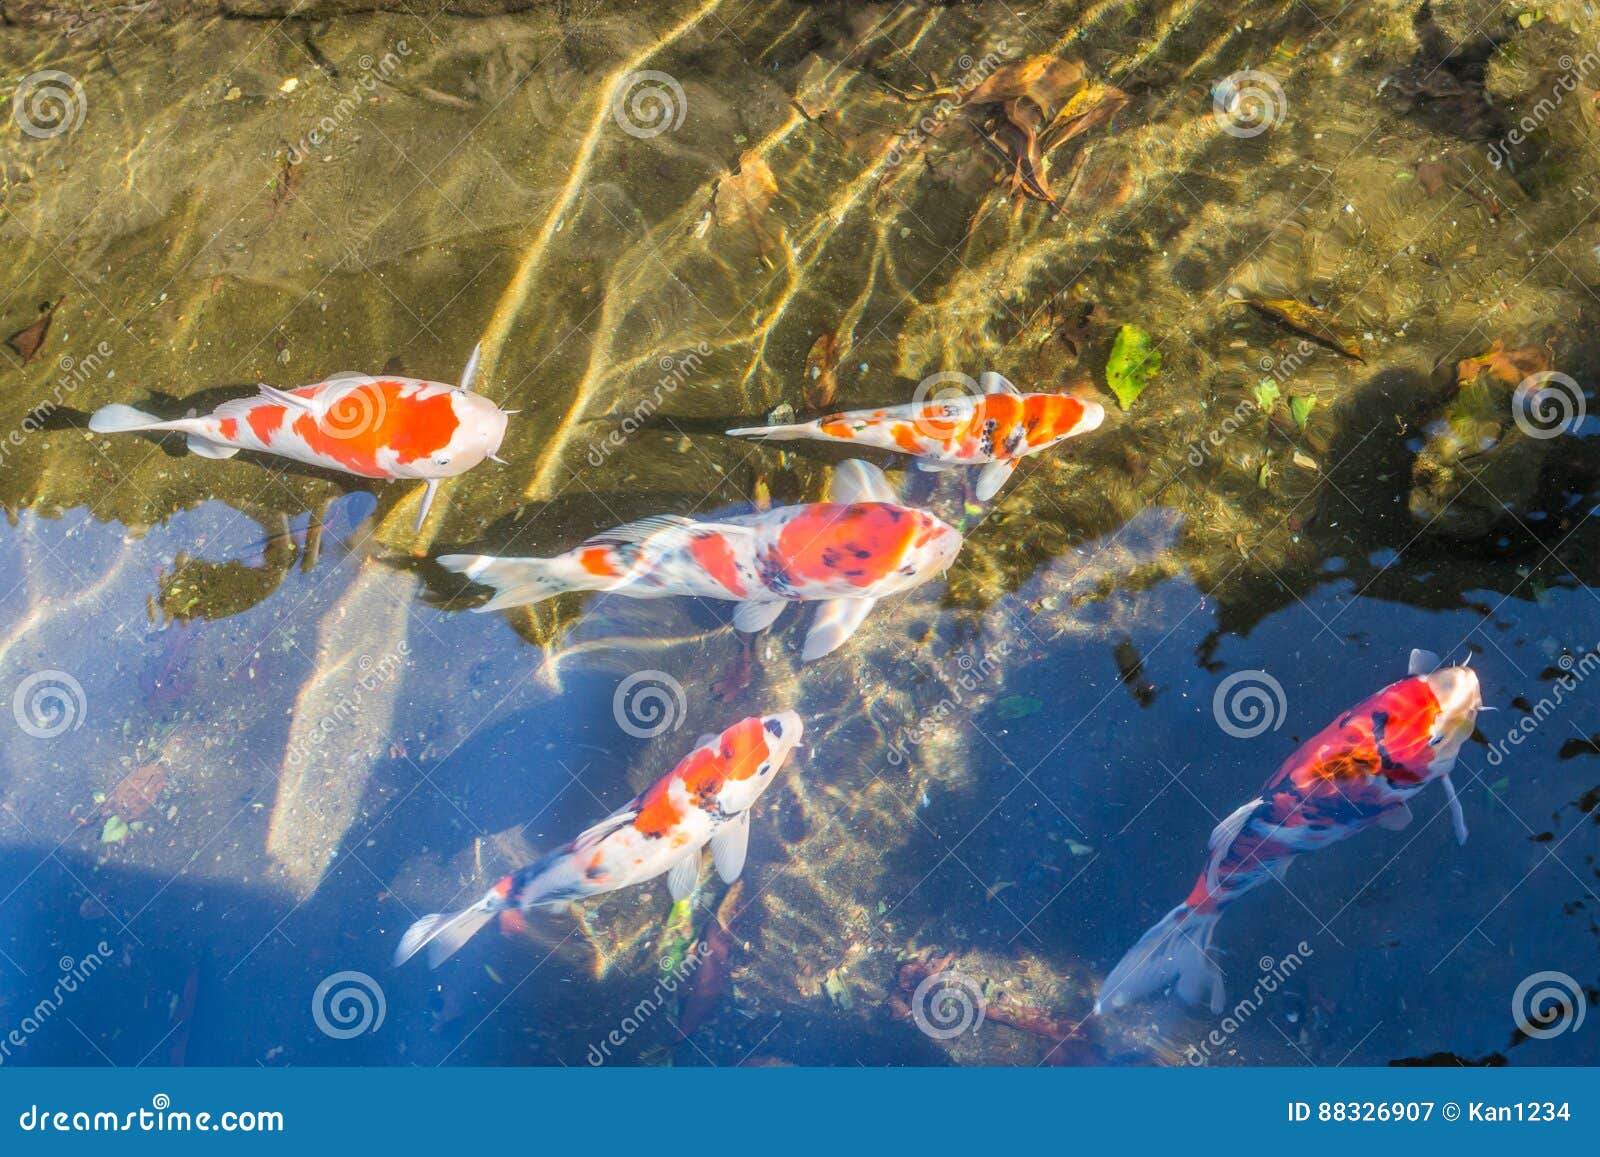 colorful koi fancy craps swim in clear water in city ditch